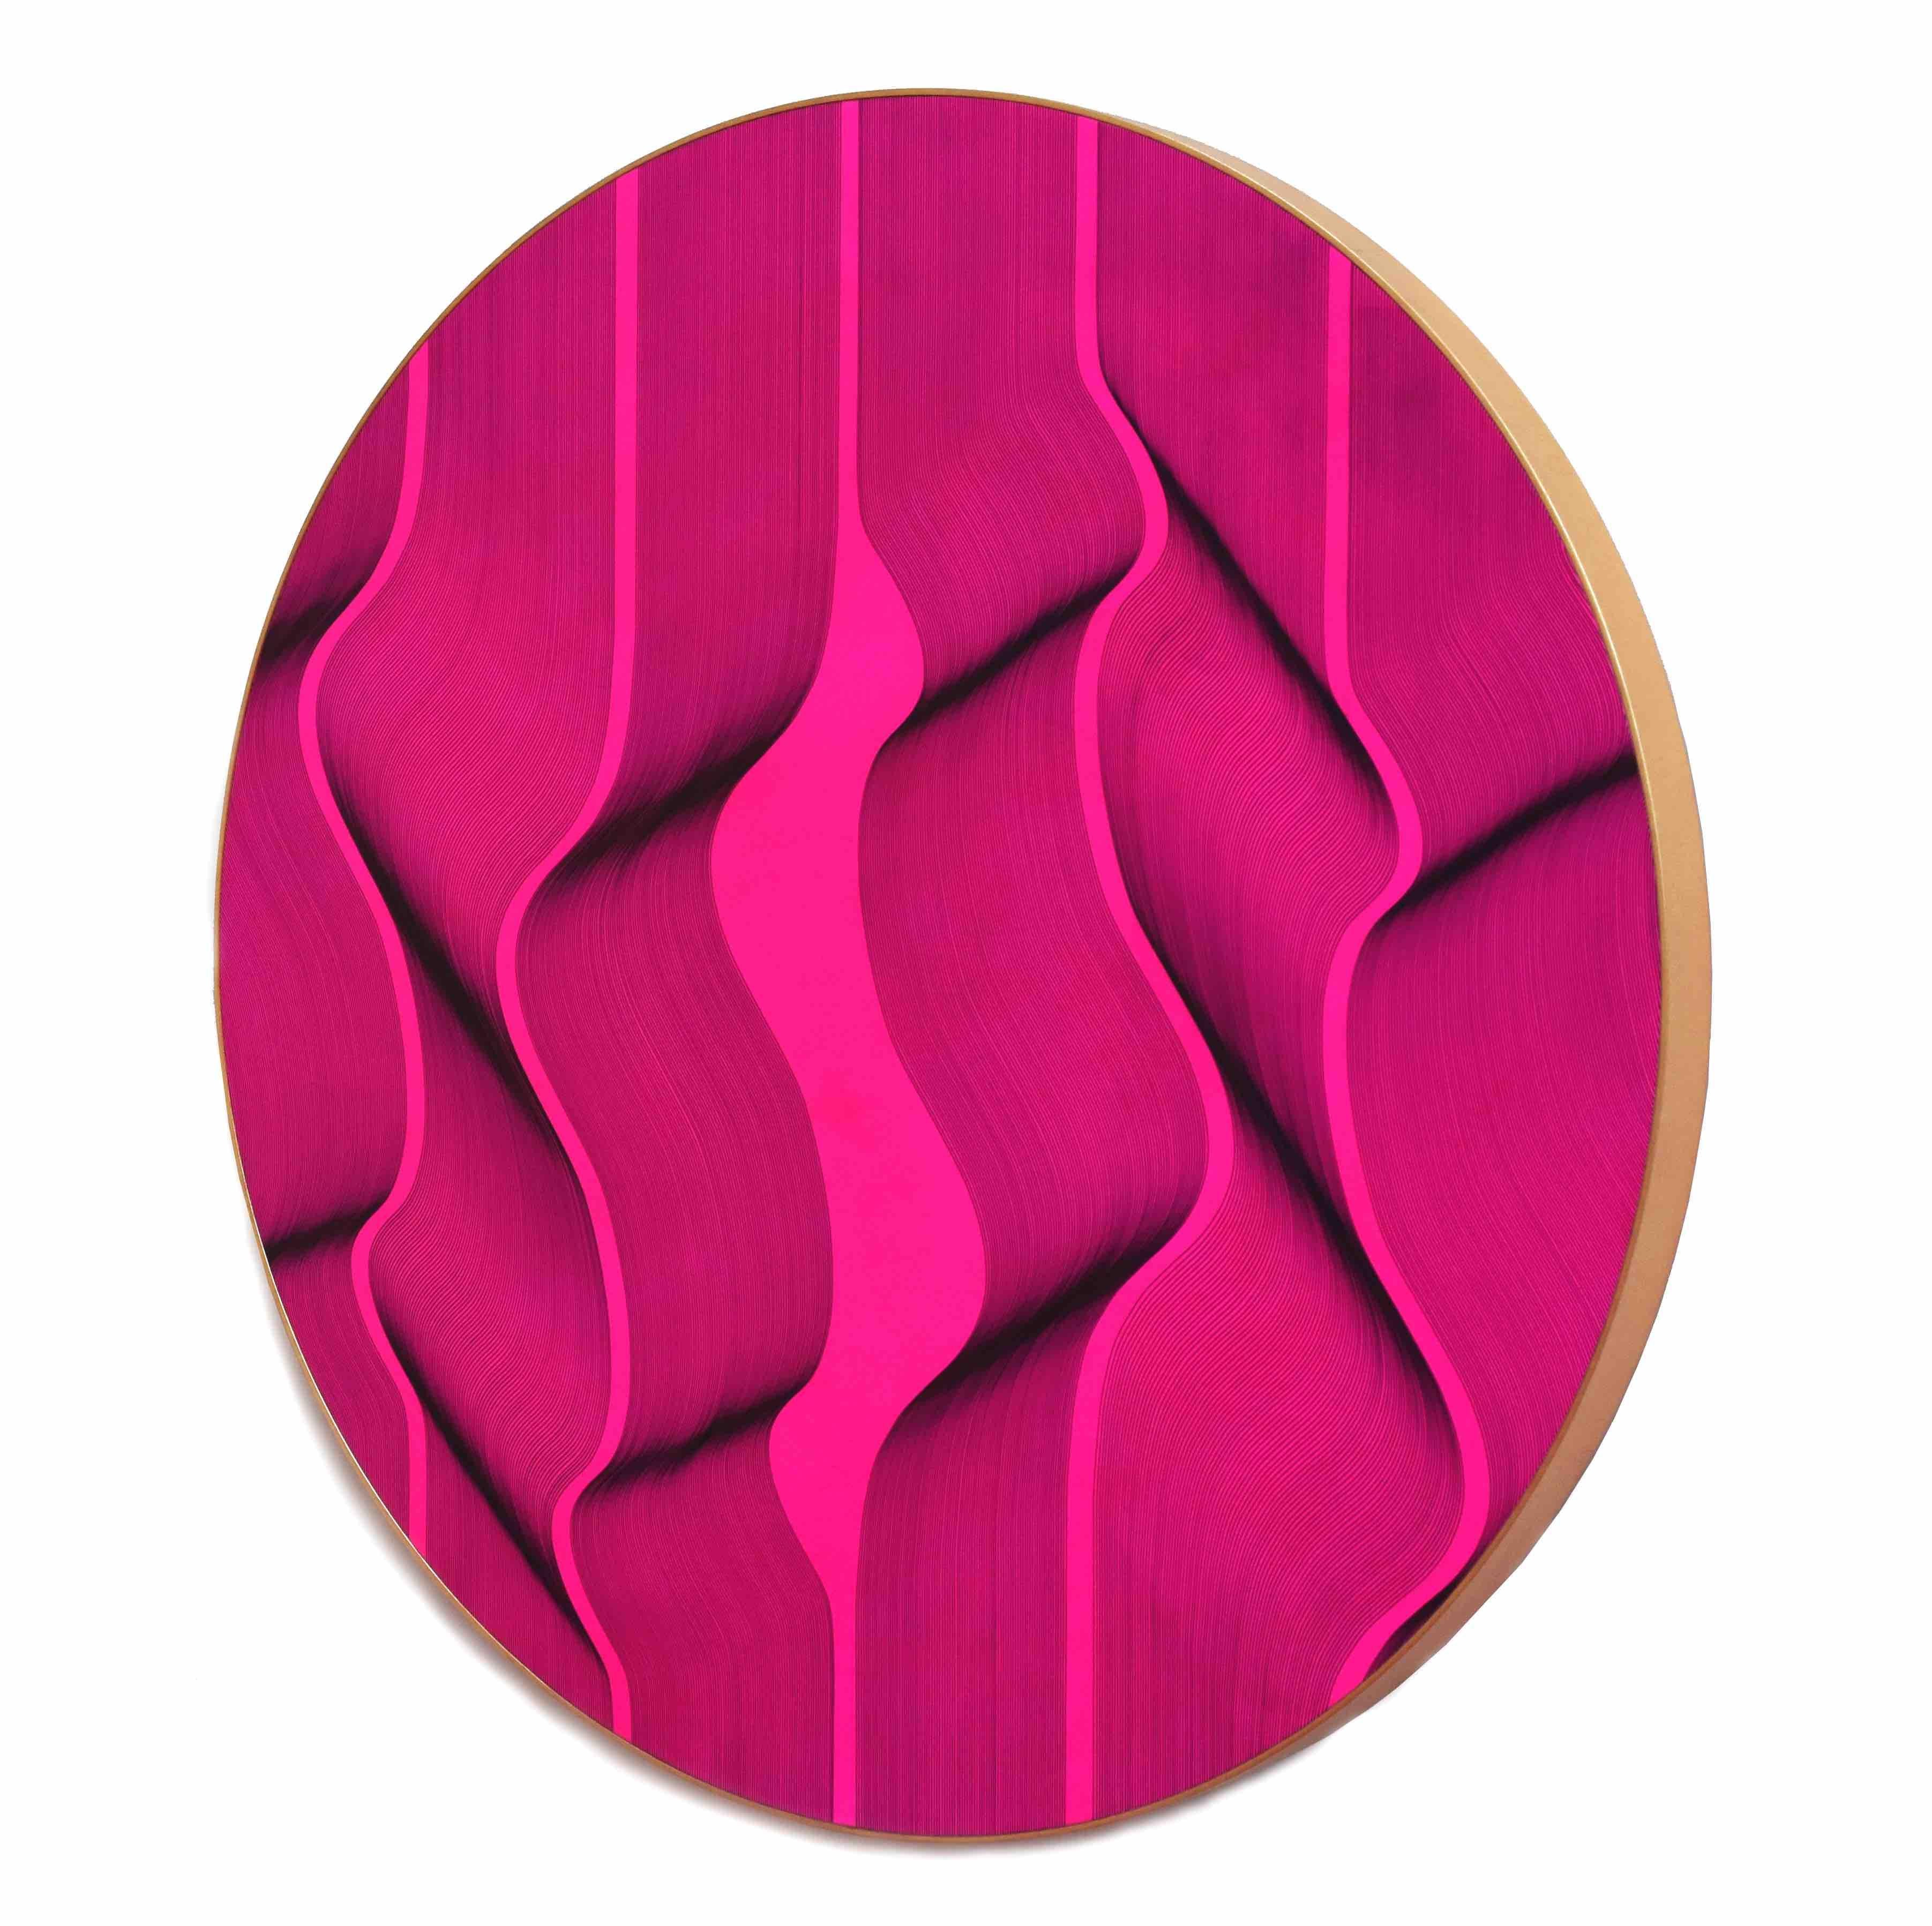 Roberto Lucchetta Abstract Painting - Fluo pink surface - geometric abstract painting